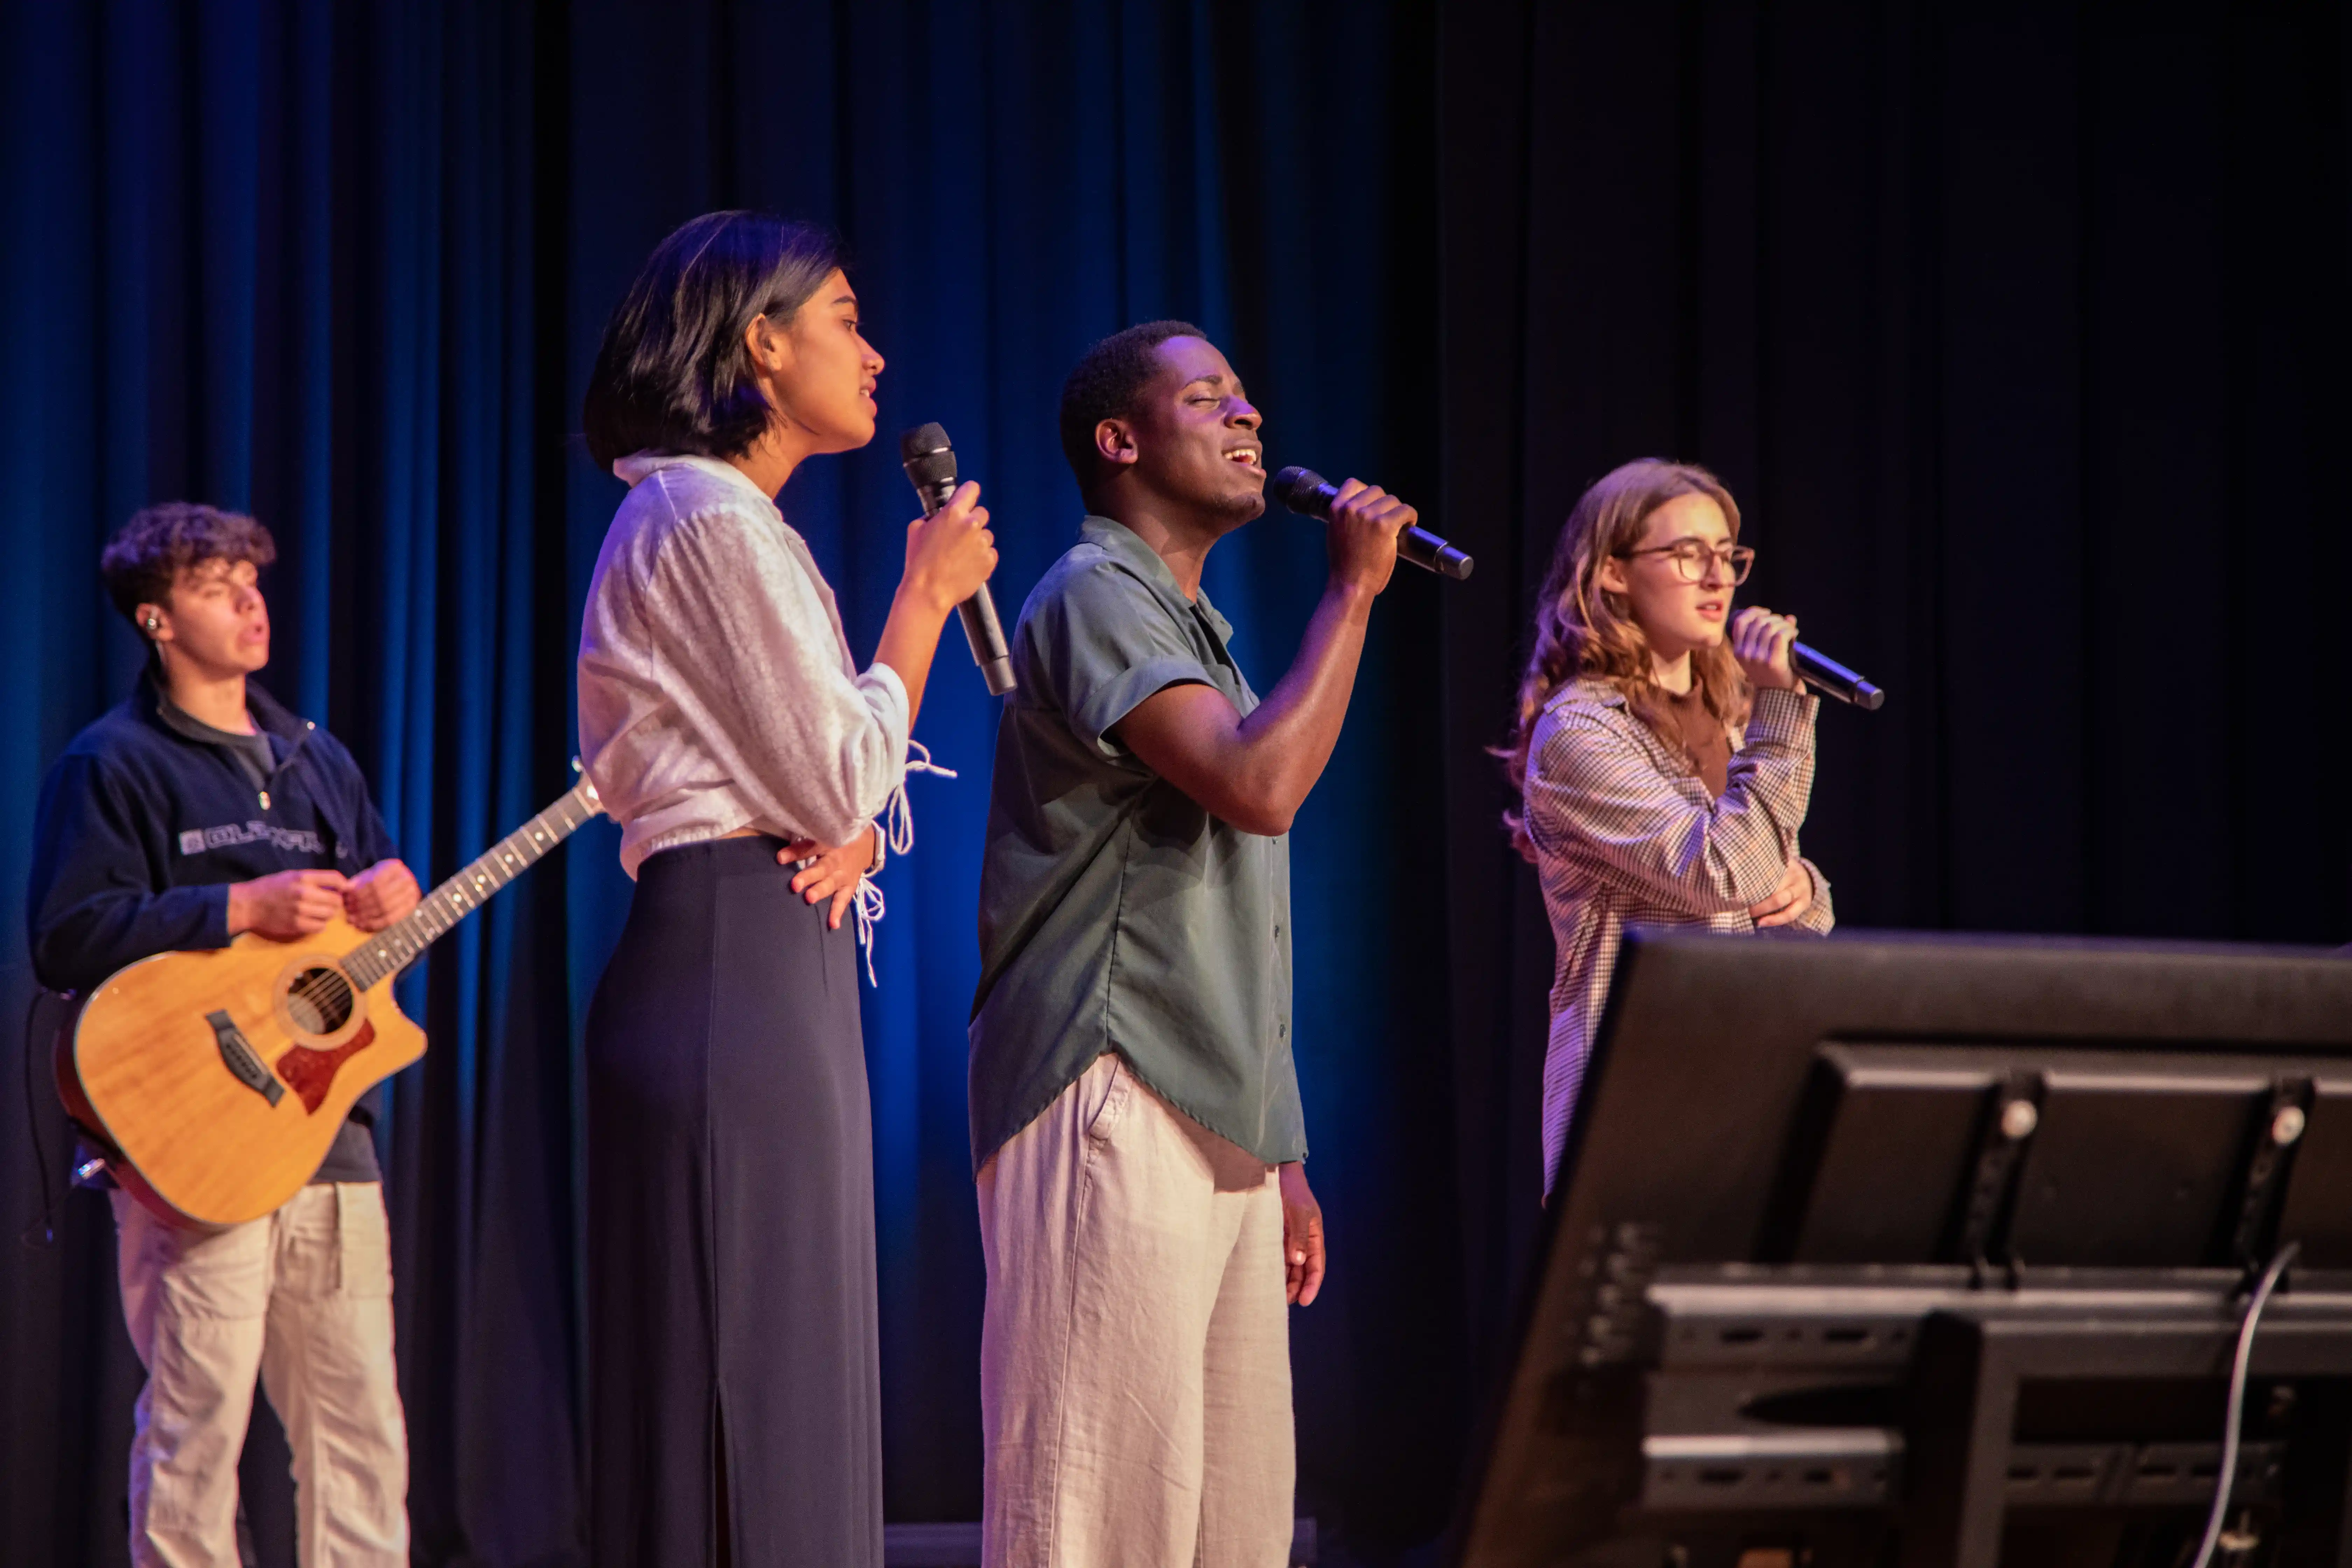 Students performing Christian music on a stage